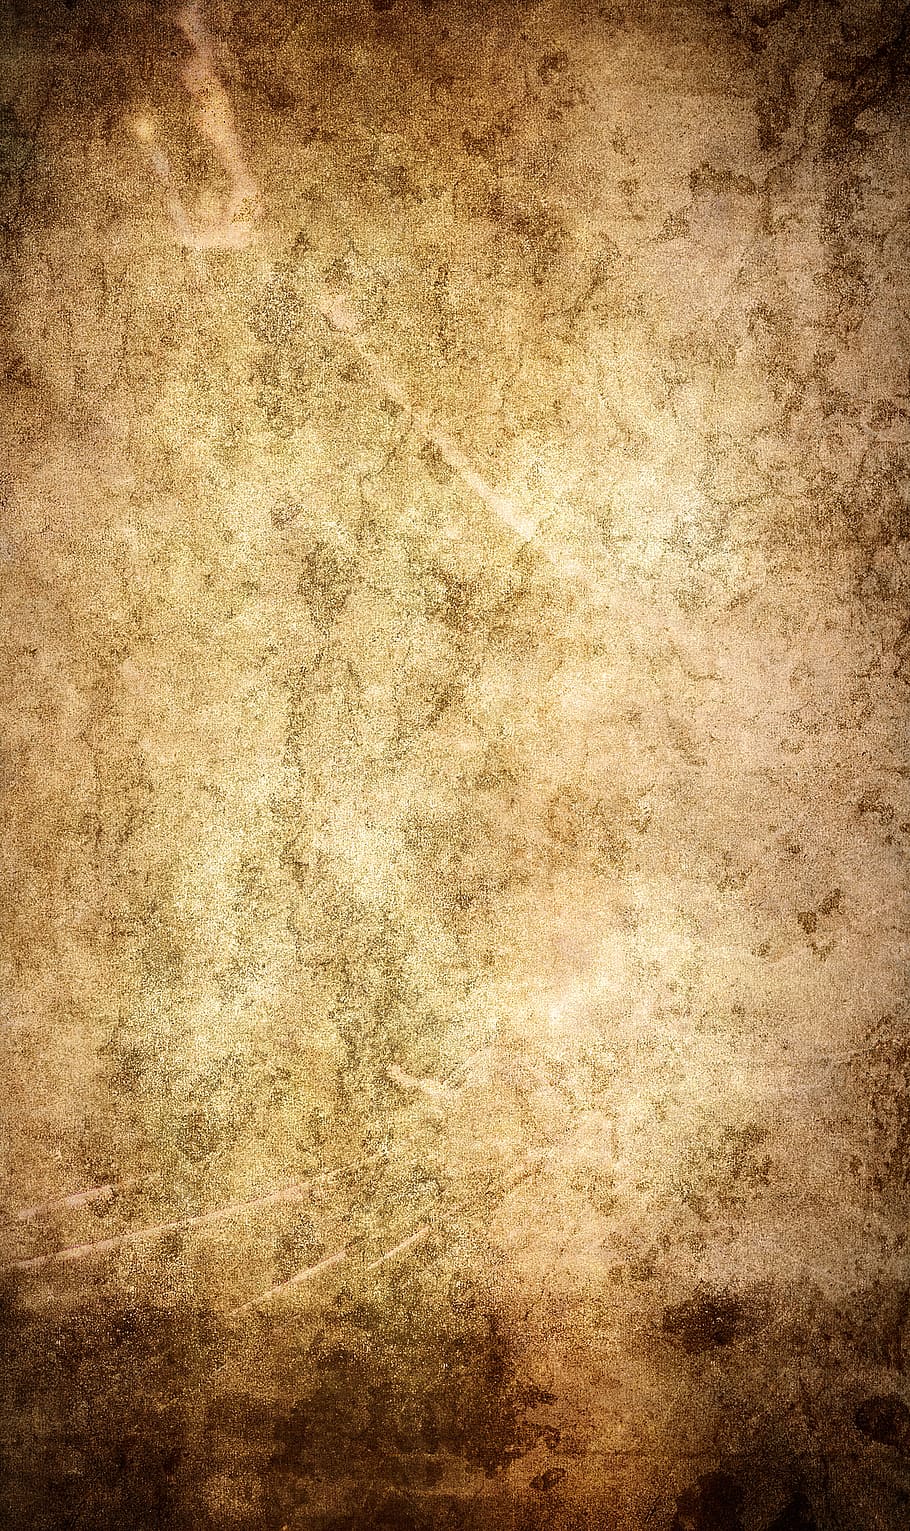 con2011, background, burnt, damaged, grunge, paper, texture, wallpaper, textured, backgrounds